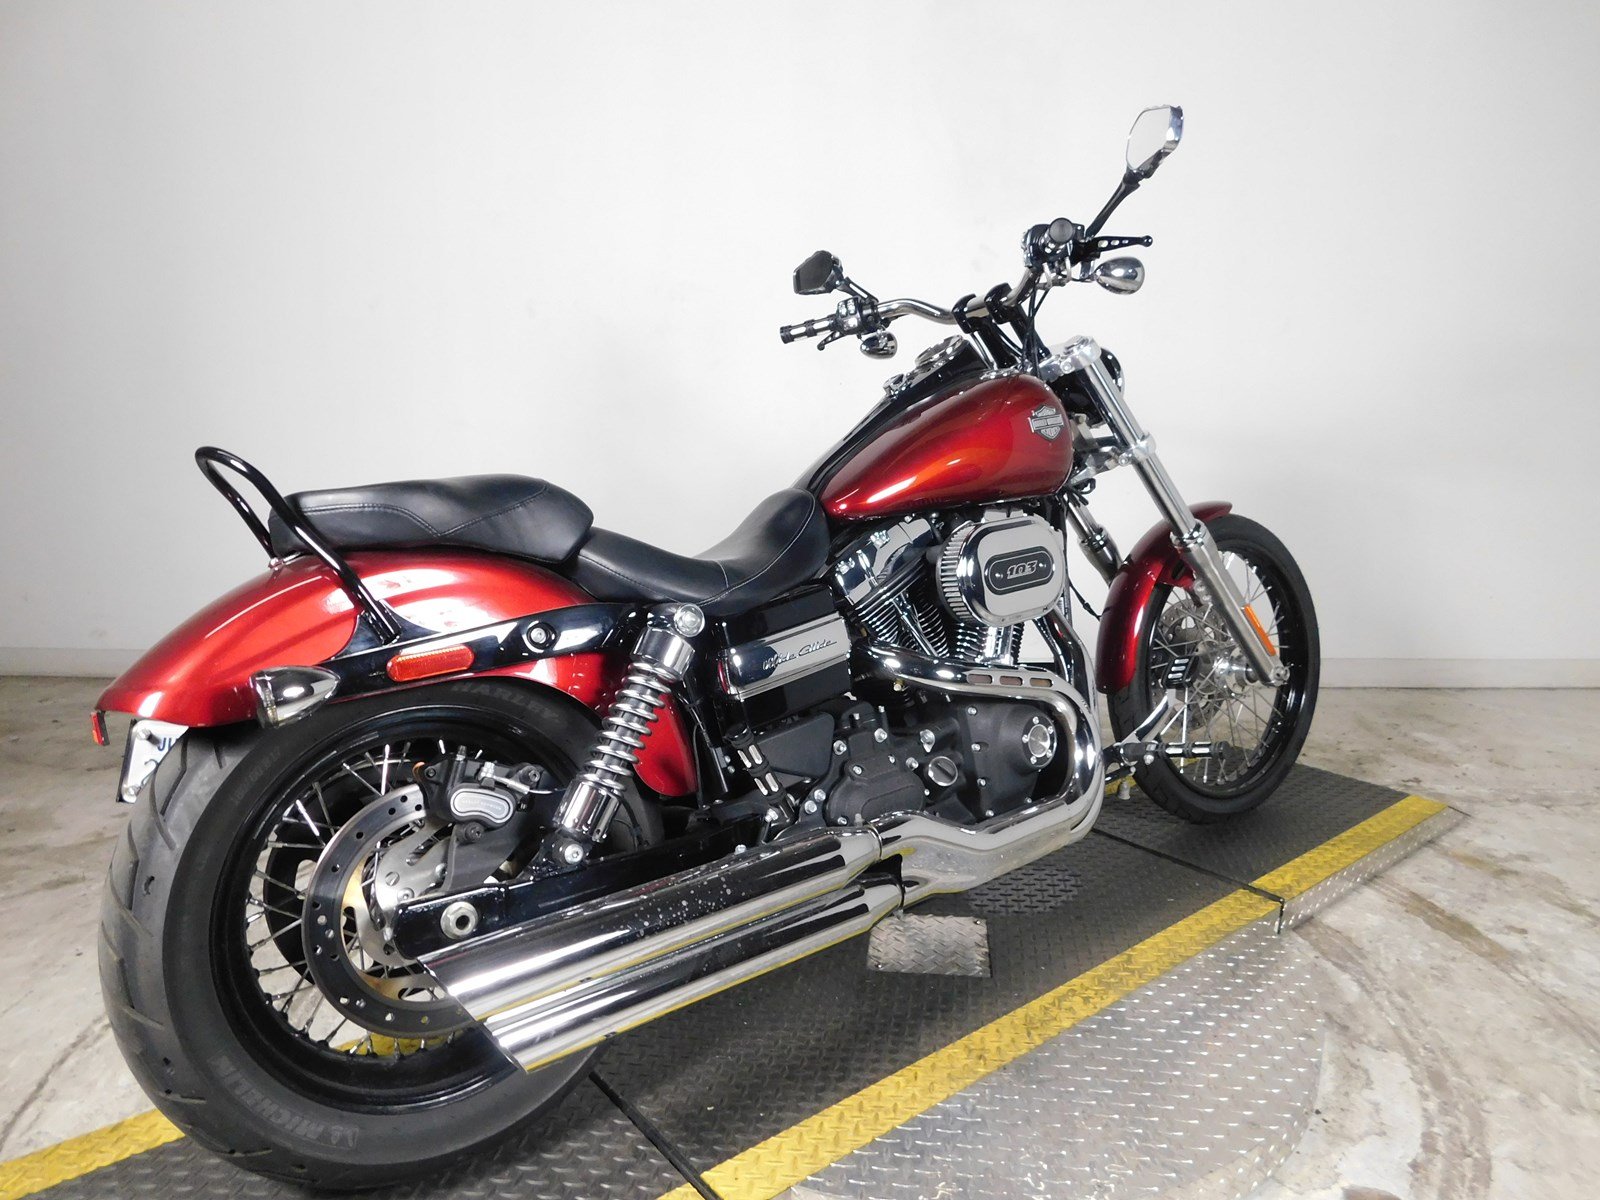 Pre-Owned 2016 Harley-Davidson Dyna Wide Glide FXDWG Dyna in ...